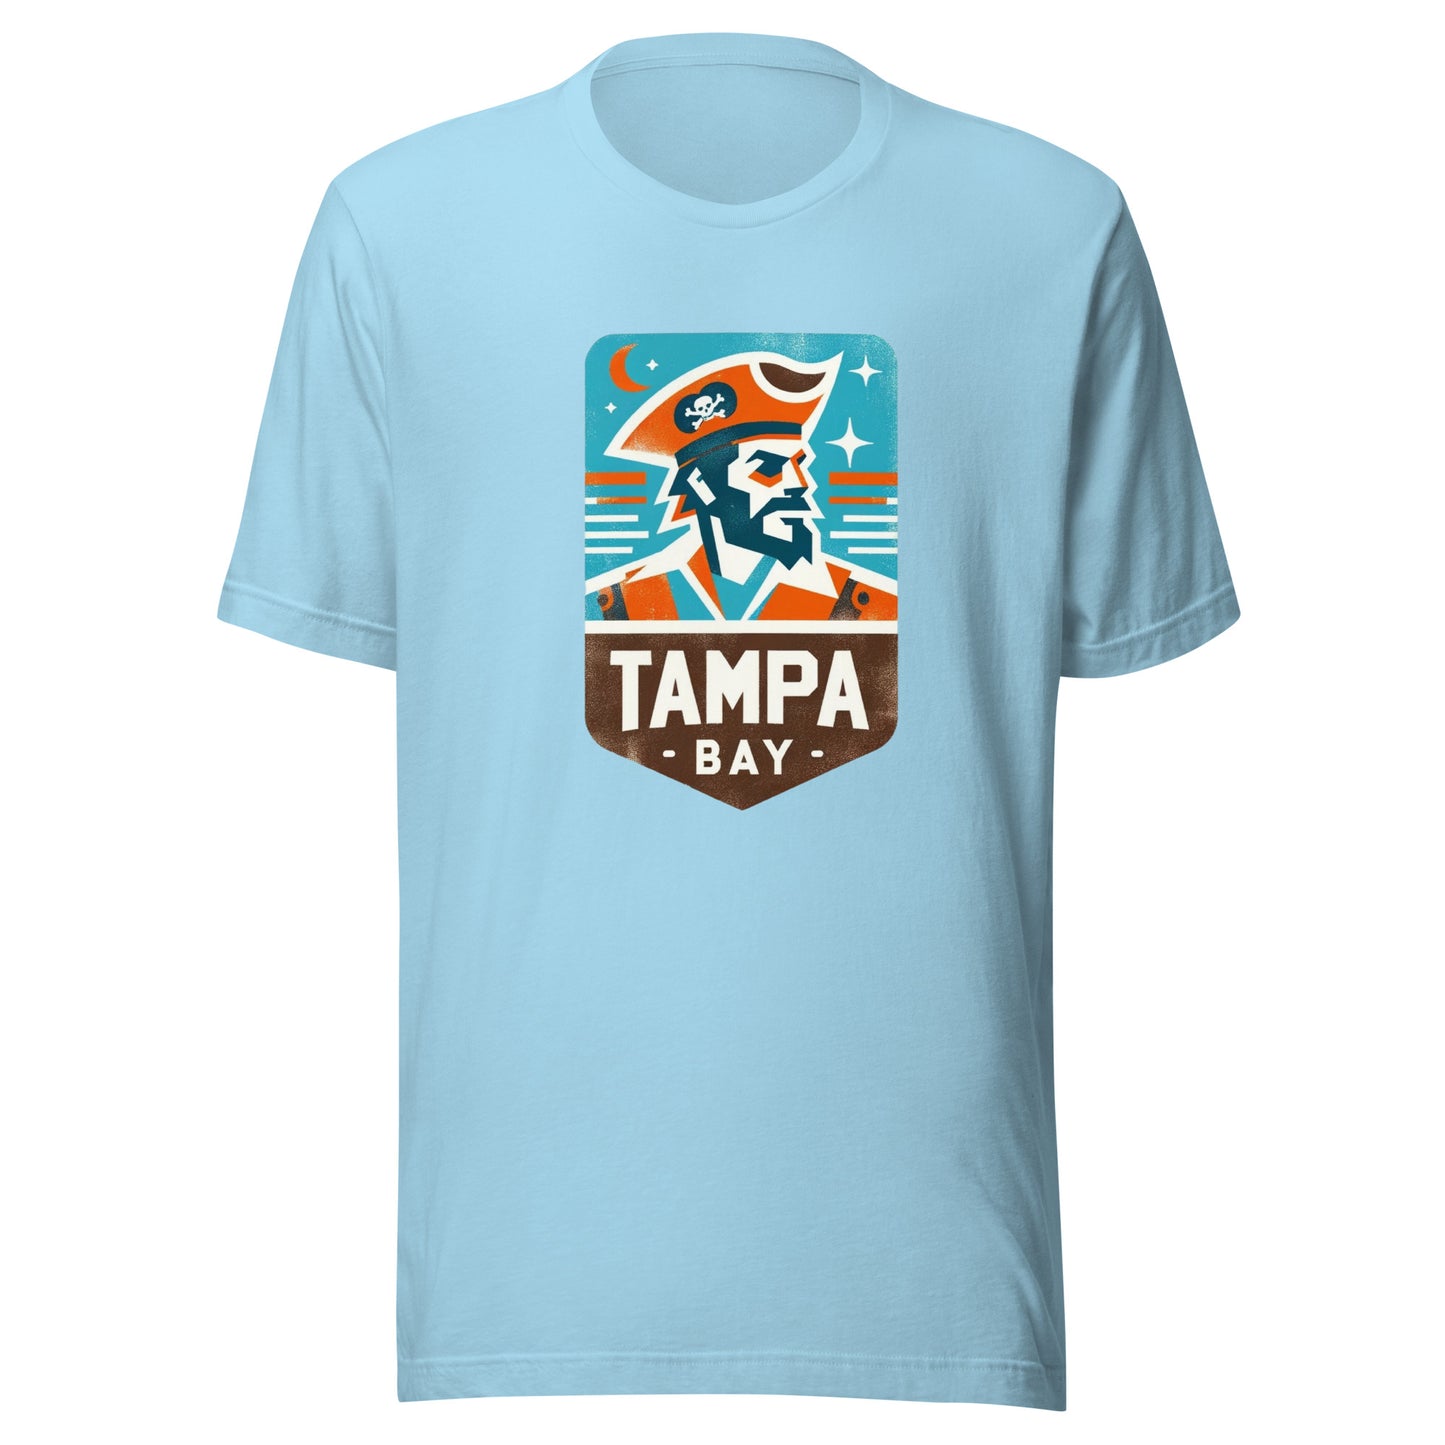 Tampa Bay Gridiron: Pirate Waters - Retro Football Tapestry Series Unisex t-shirt